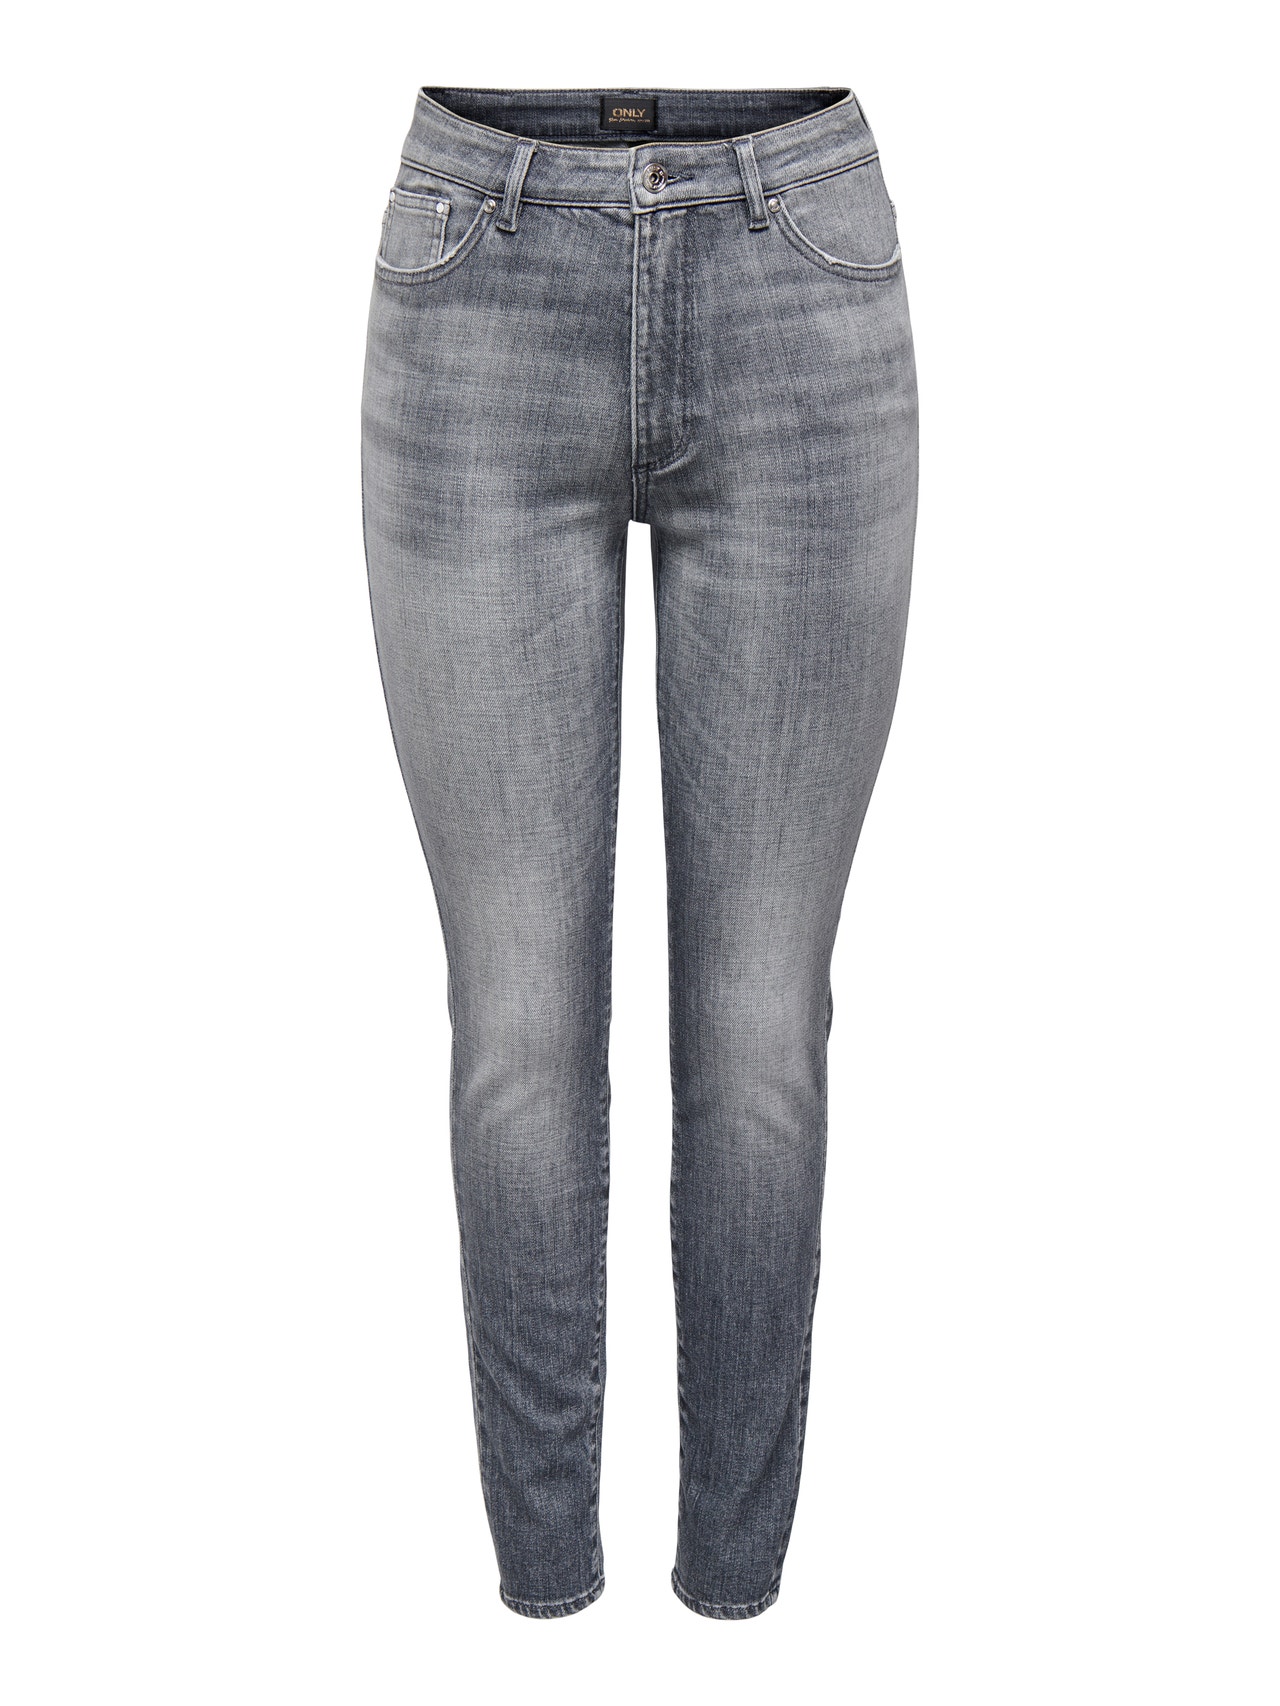 ONLY Skinny Fit Hohe Taille Jeans -Medium Grey Denim - 15288849